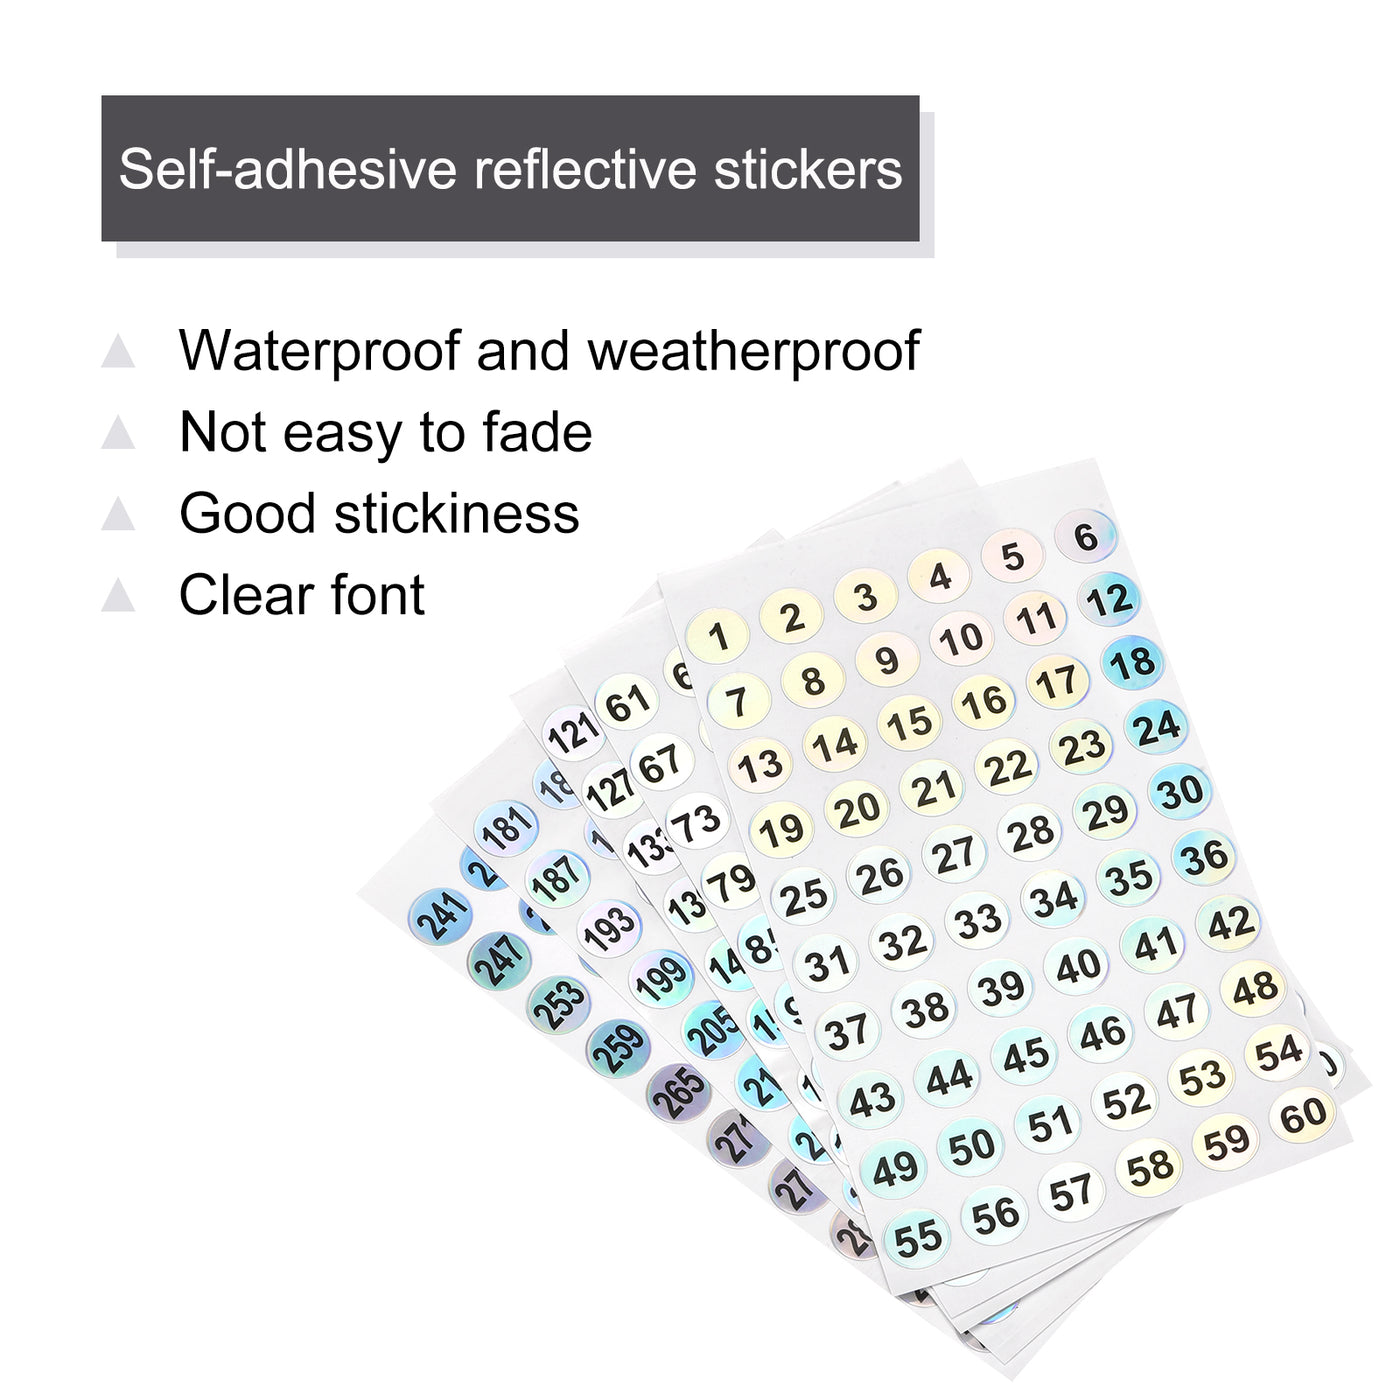 Harfington Number Sticker 1 to 300 Number Self Adhesive Reflective Label for Sorting Storage Box Inventory, 5 Sheet